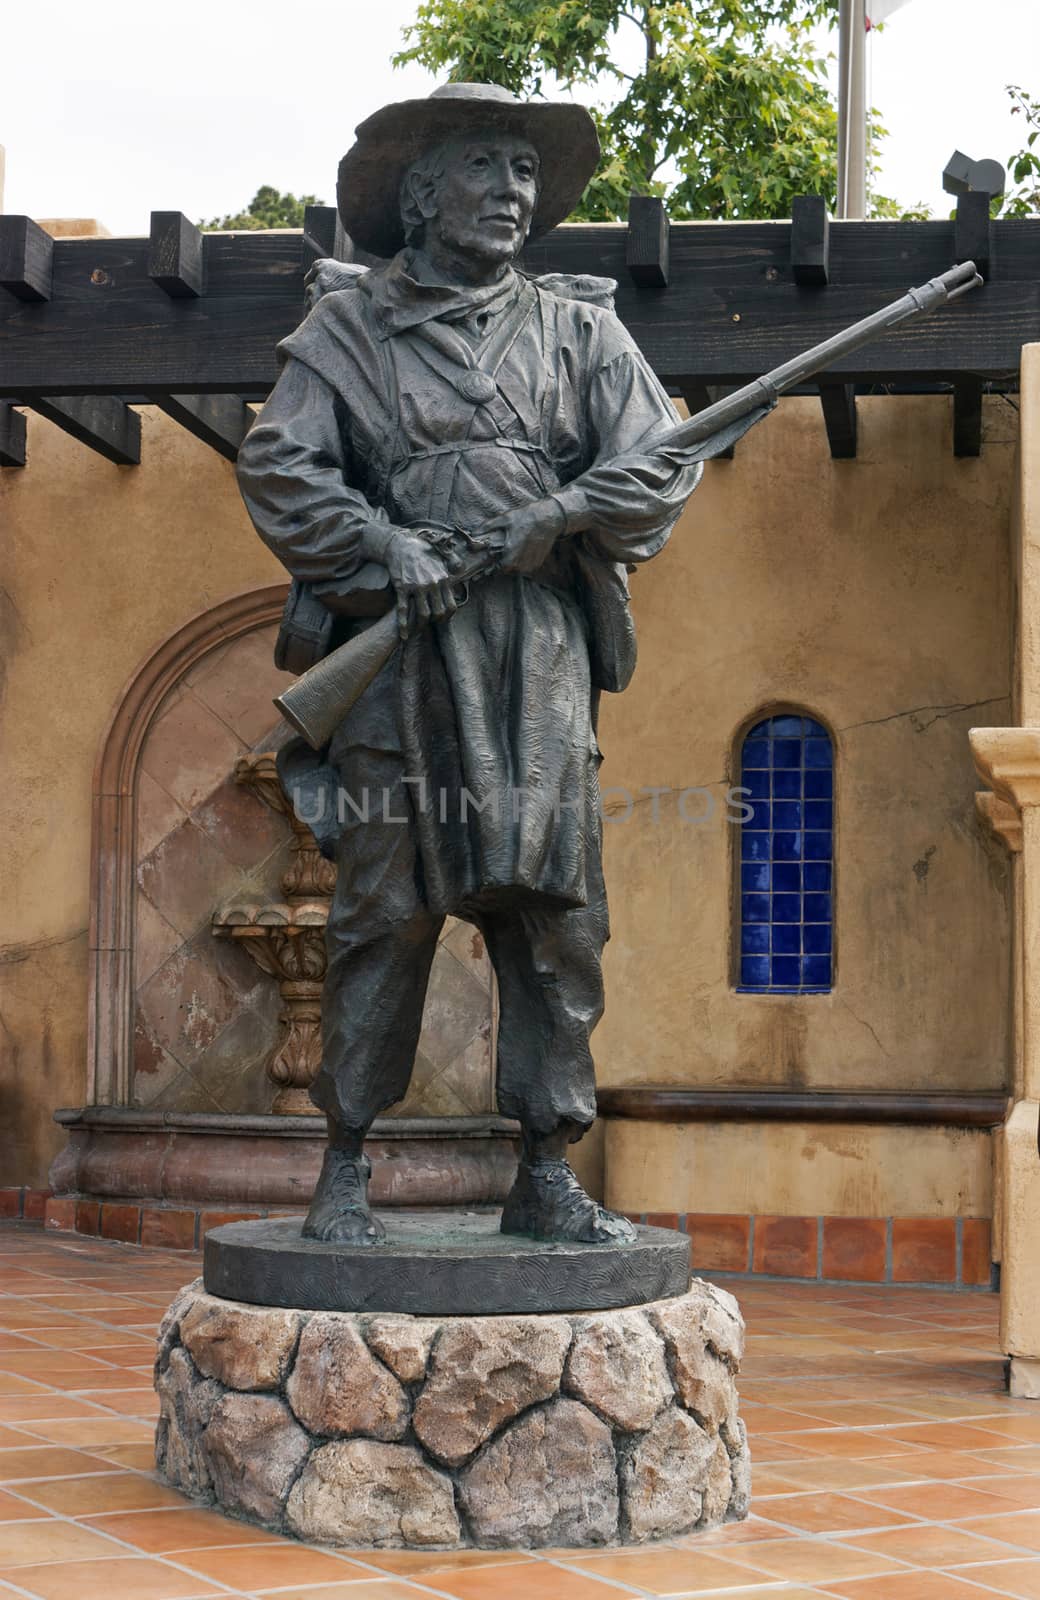 Statue of soldier at the Mormon Battalion by marlen